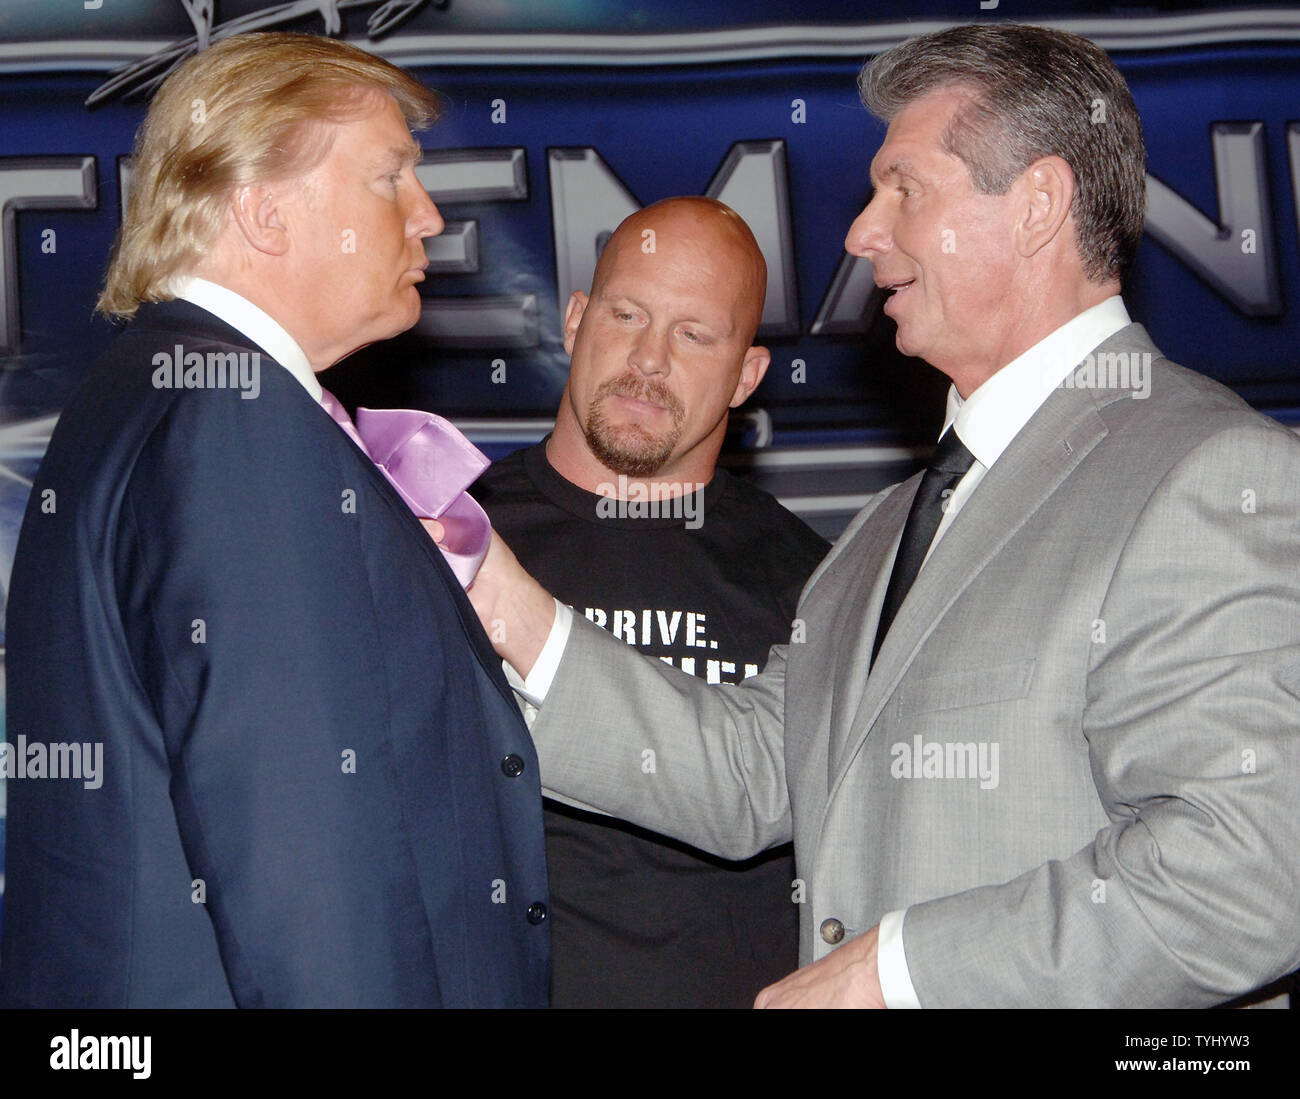 Wrestler/referee Stone Cold Steve Austin (C) looks on while World Wrestling Entertainment CEO Vince McMahon (R) pulls on the tie of business icon Donald Trump during a March 28, 2007 photo op in New York to announce their upcoming 'Battle of the Billionaires' match on April 1, 2007 in Detroit. (UPI Photo/Ezio Petersen) Stock Photo